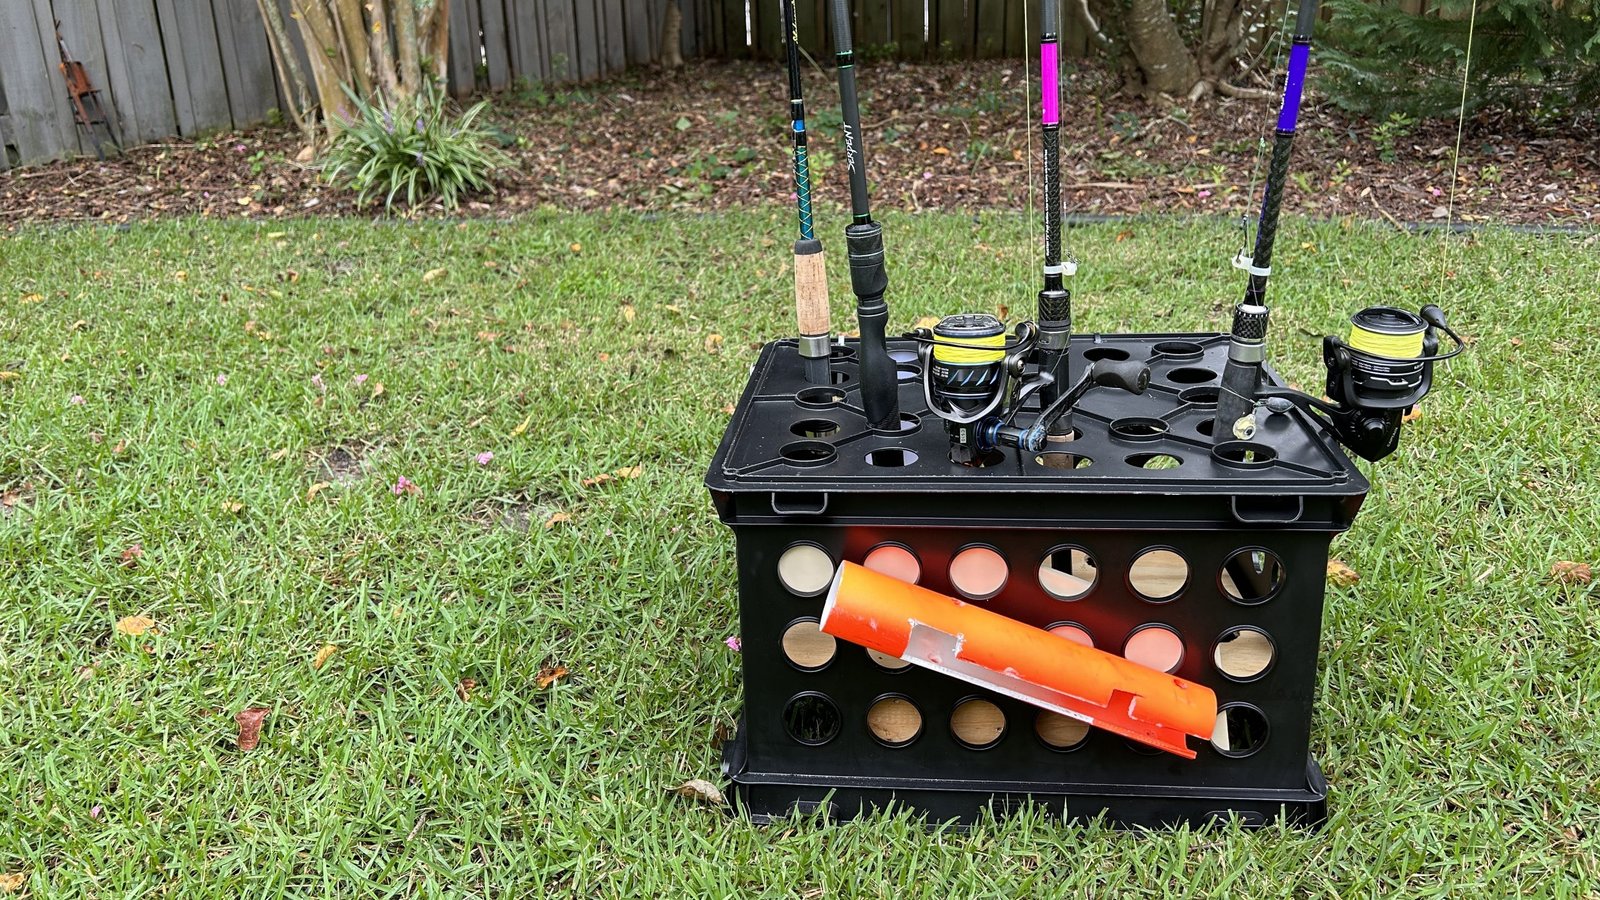 Add Fishing Rod Storage to Your Milk Crate Fishing Rod Holder - CatchGuide  Outdoors